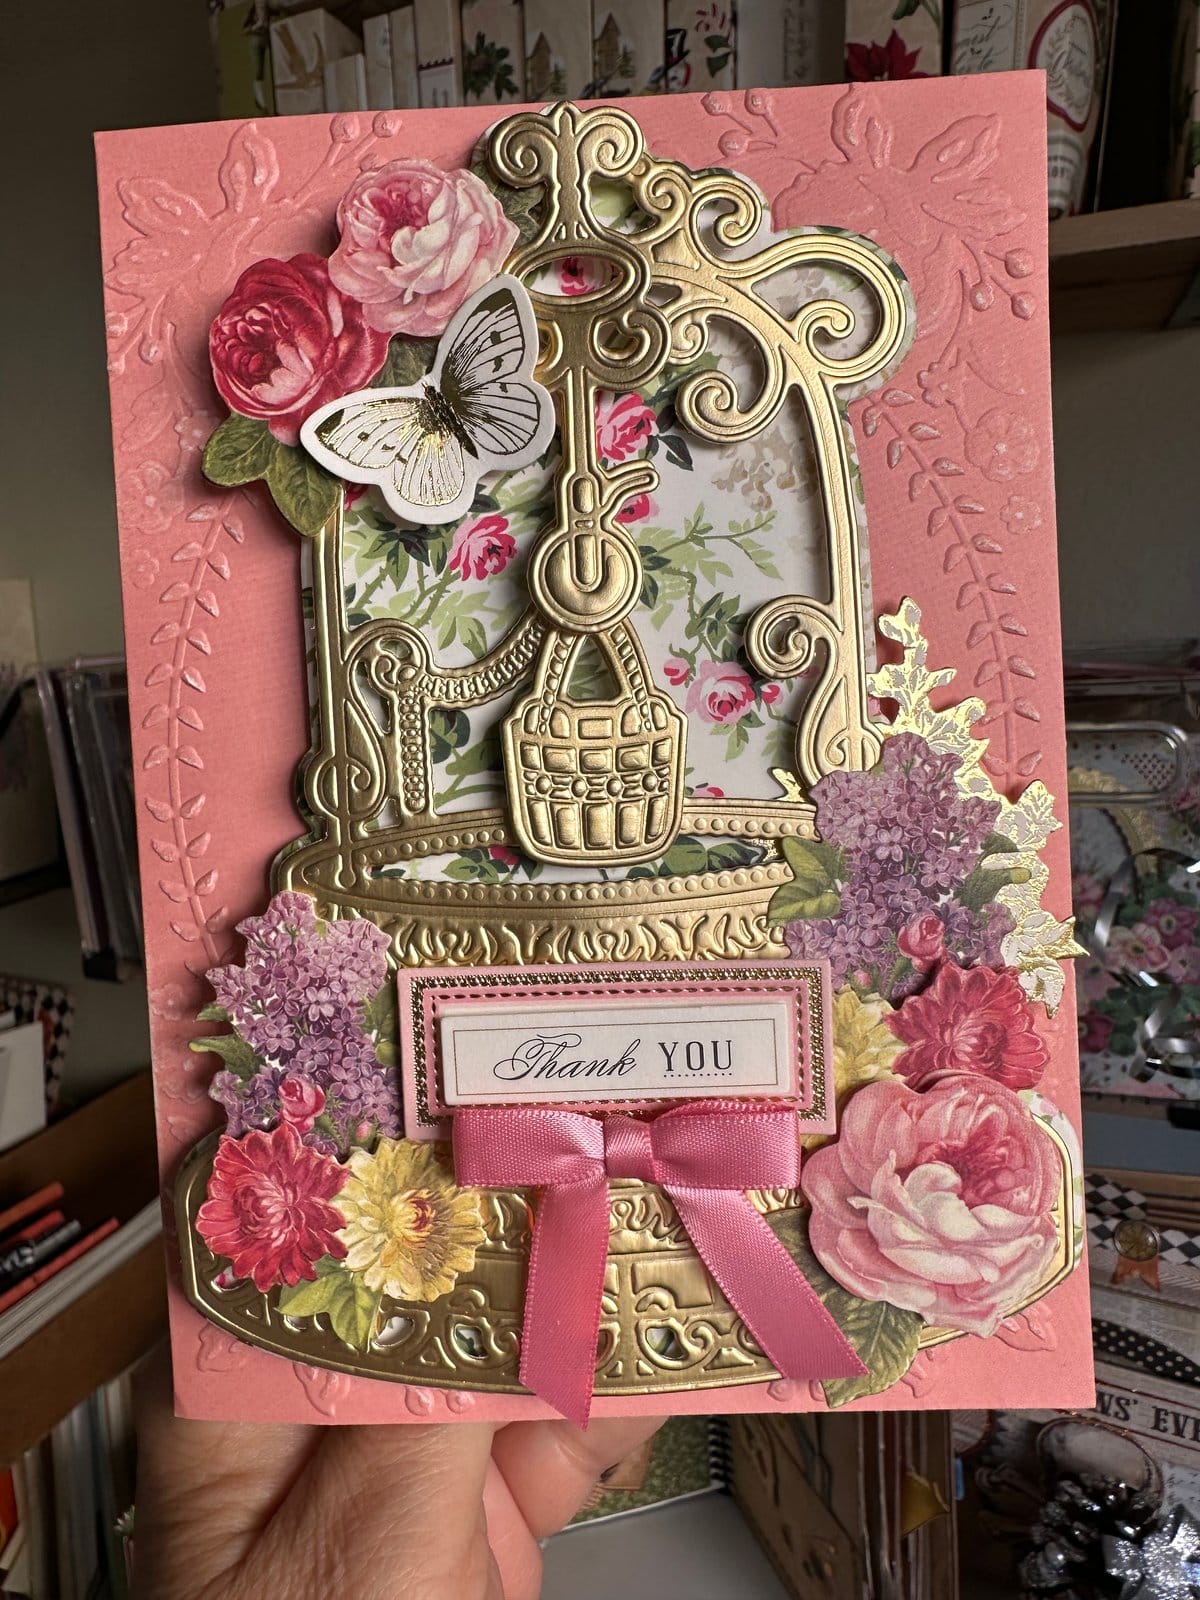 A hand holding a pink card with a bird cage and flowers.